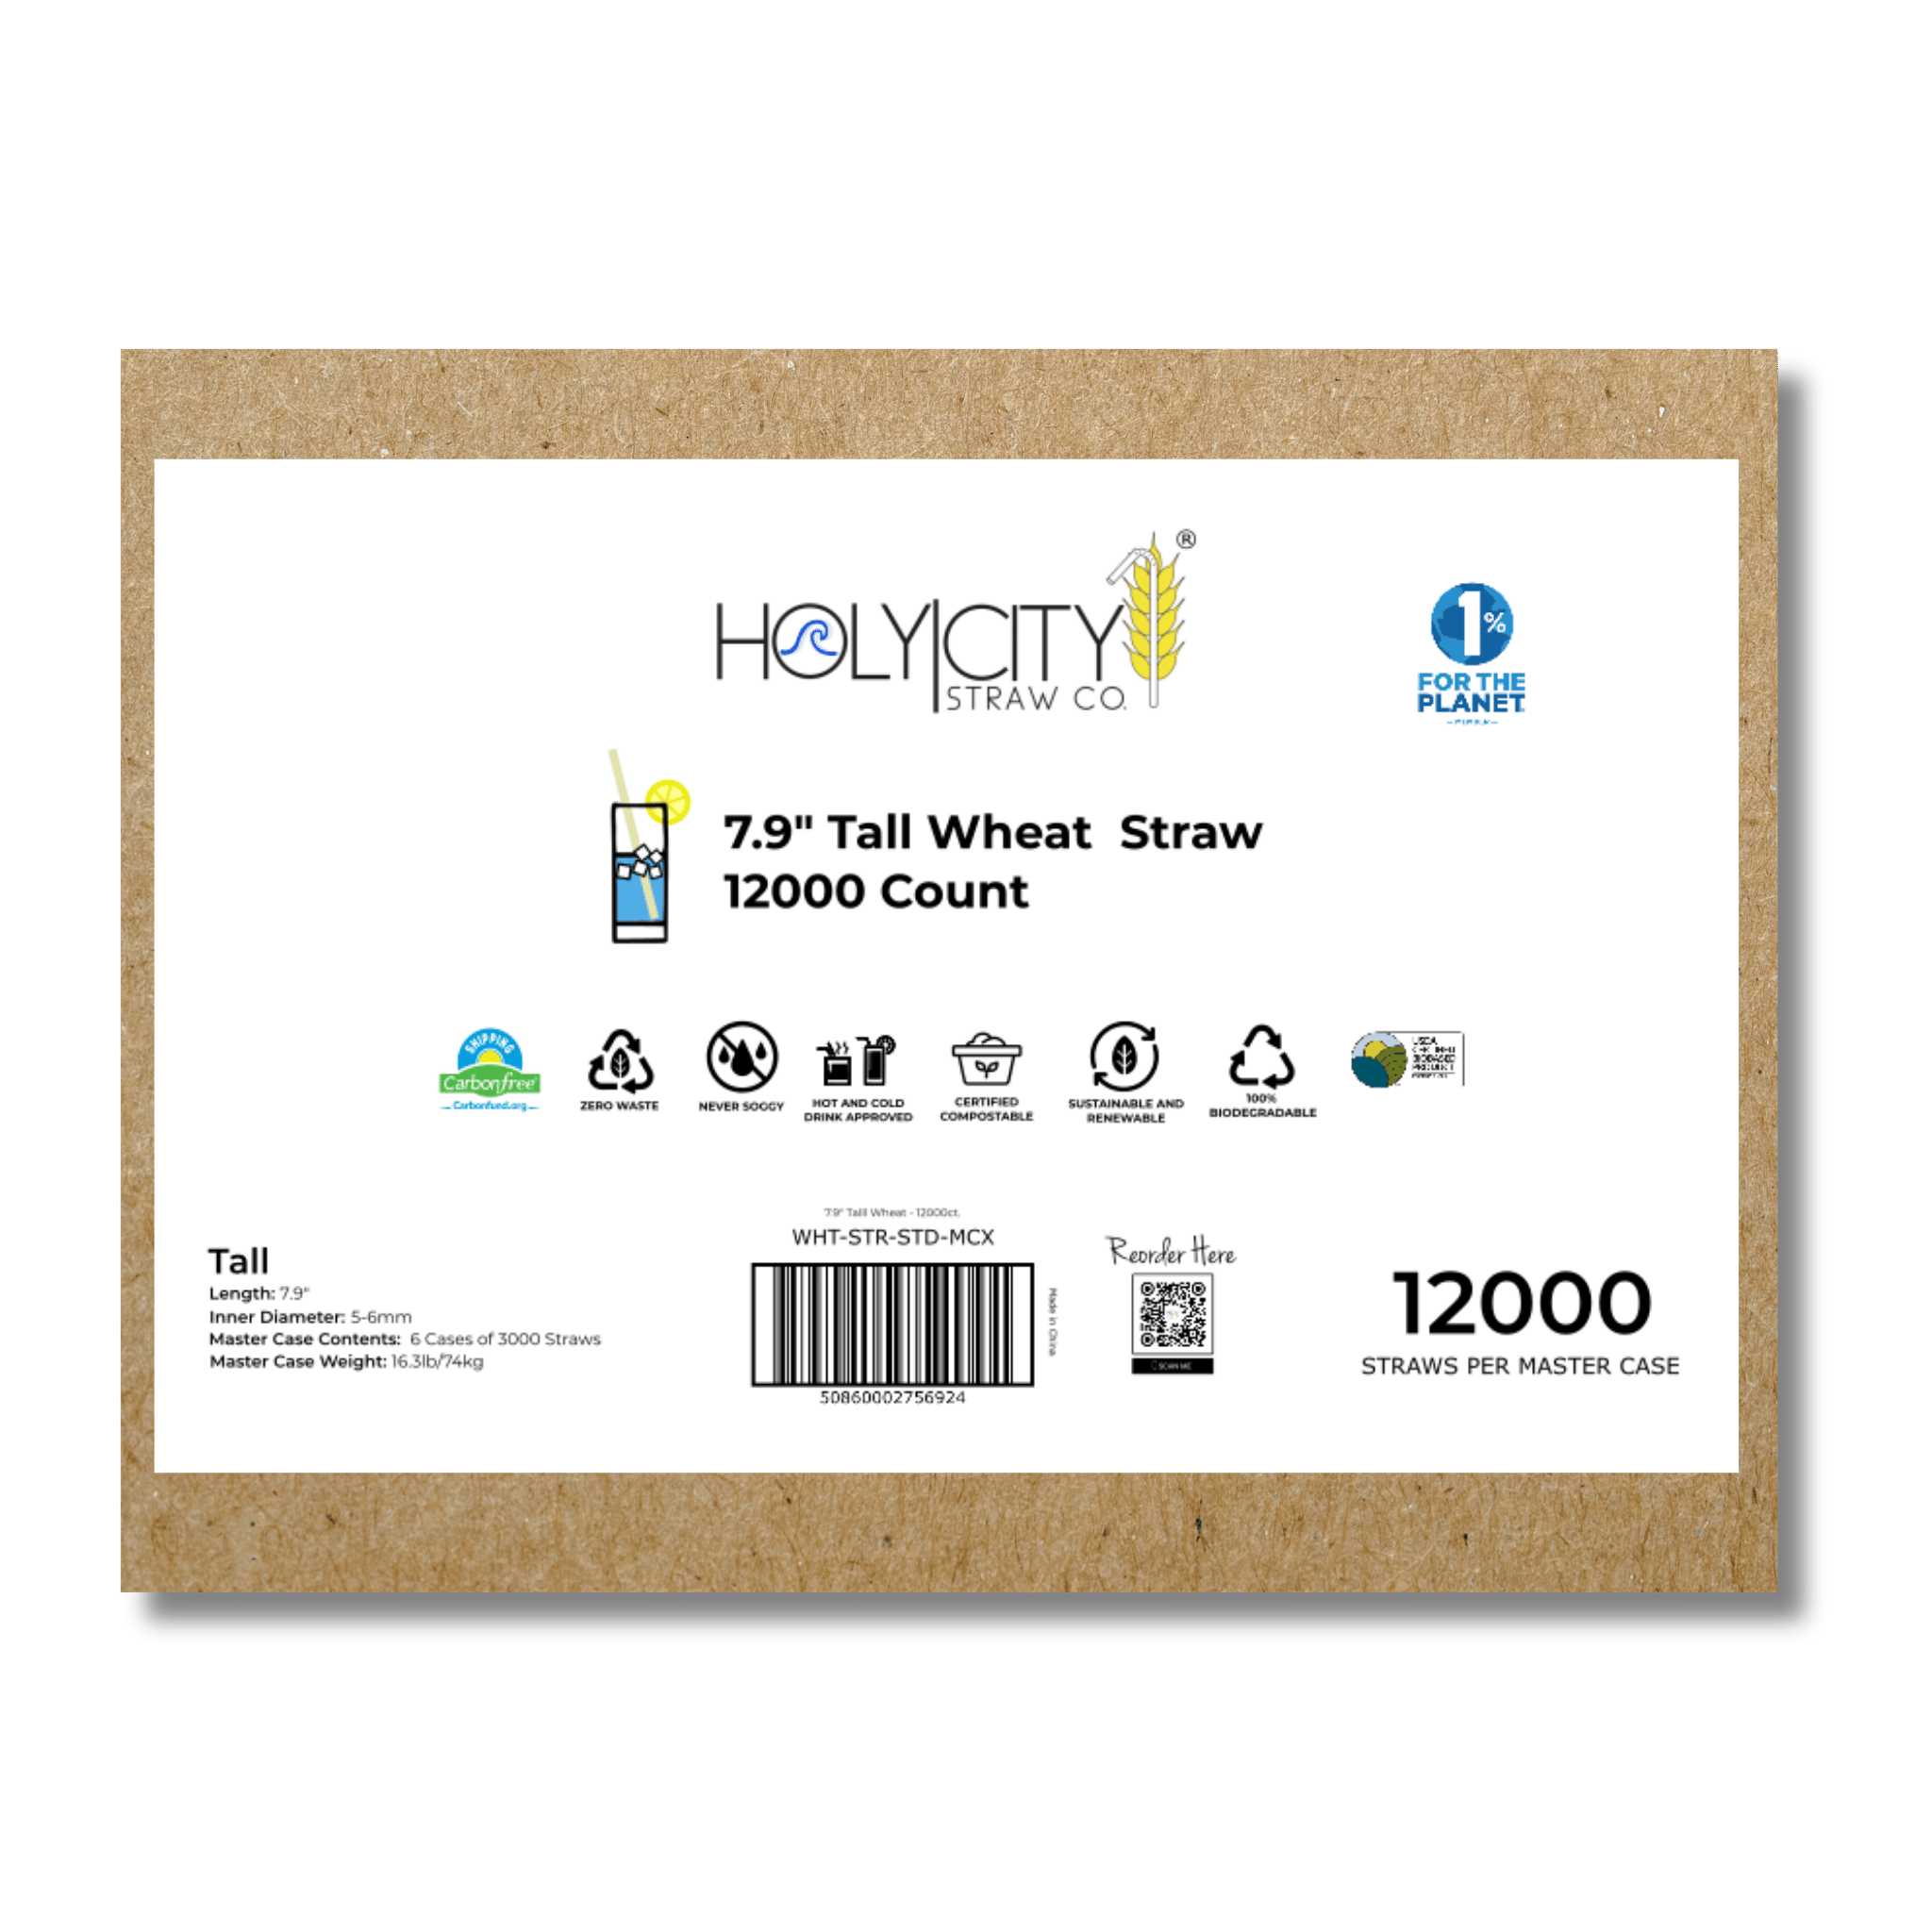 HolyCityStrawCompany 7.9-inch Wheat Tall Straws box of 12000 straws with environmental certifications and usage icons.